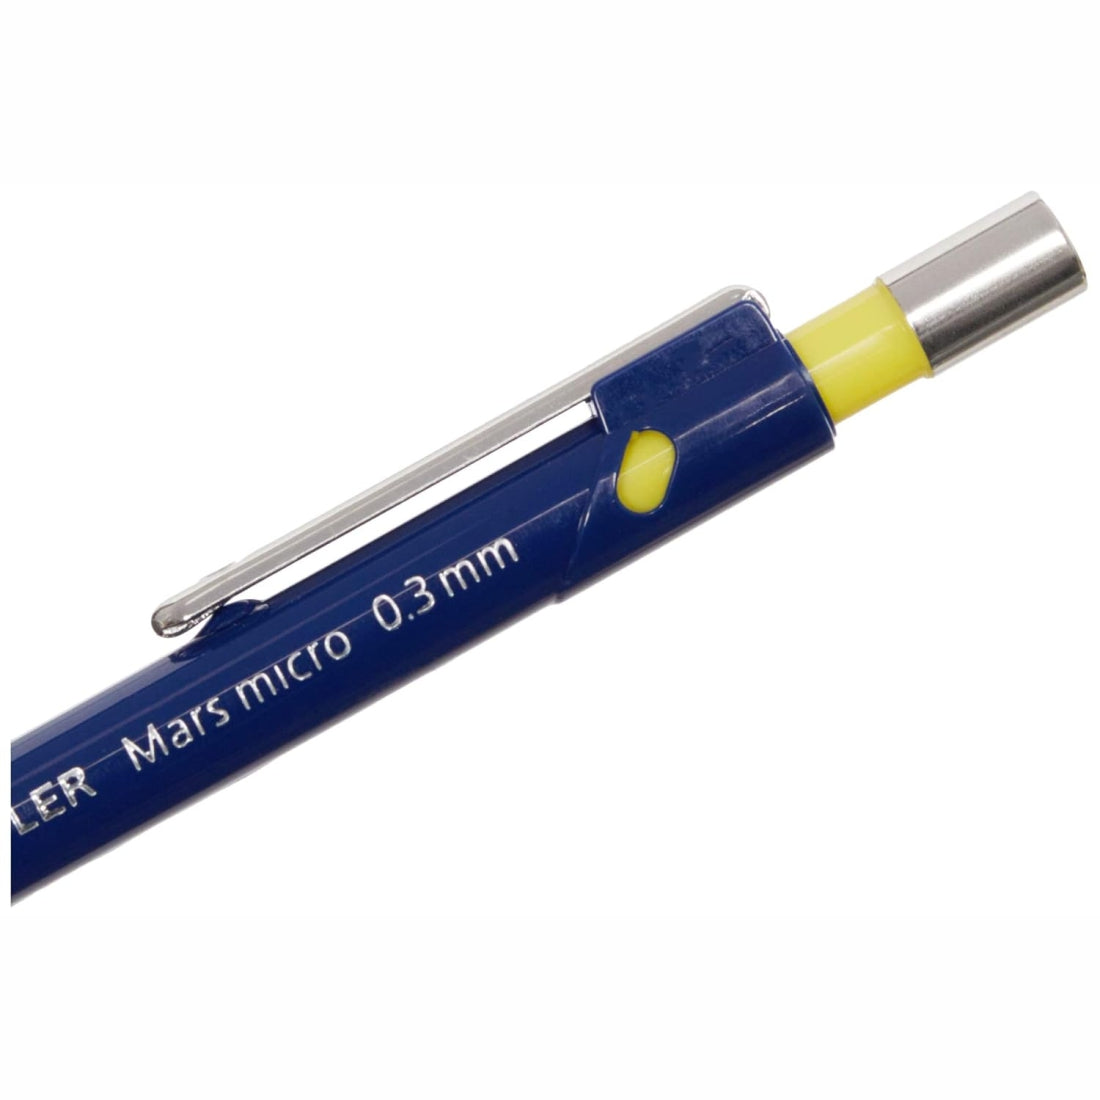 Staedtler Mechanical Pencil with Lead